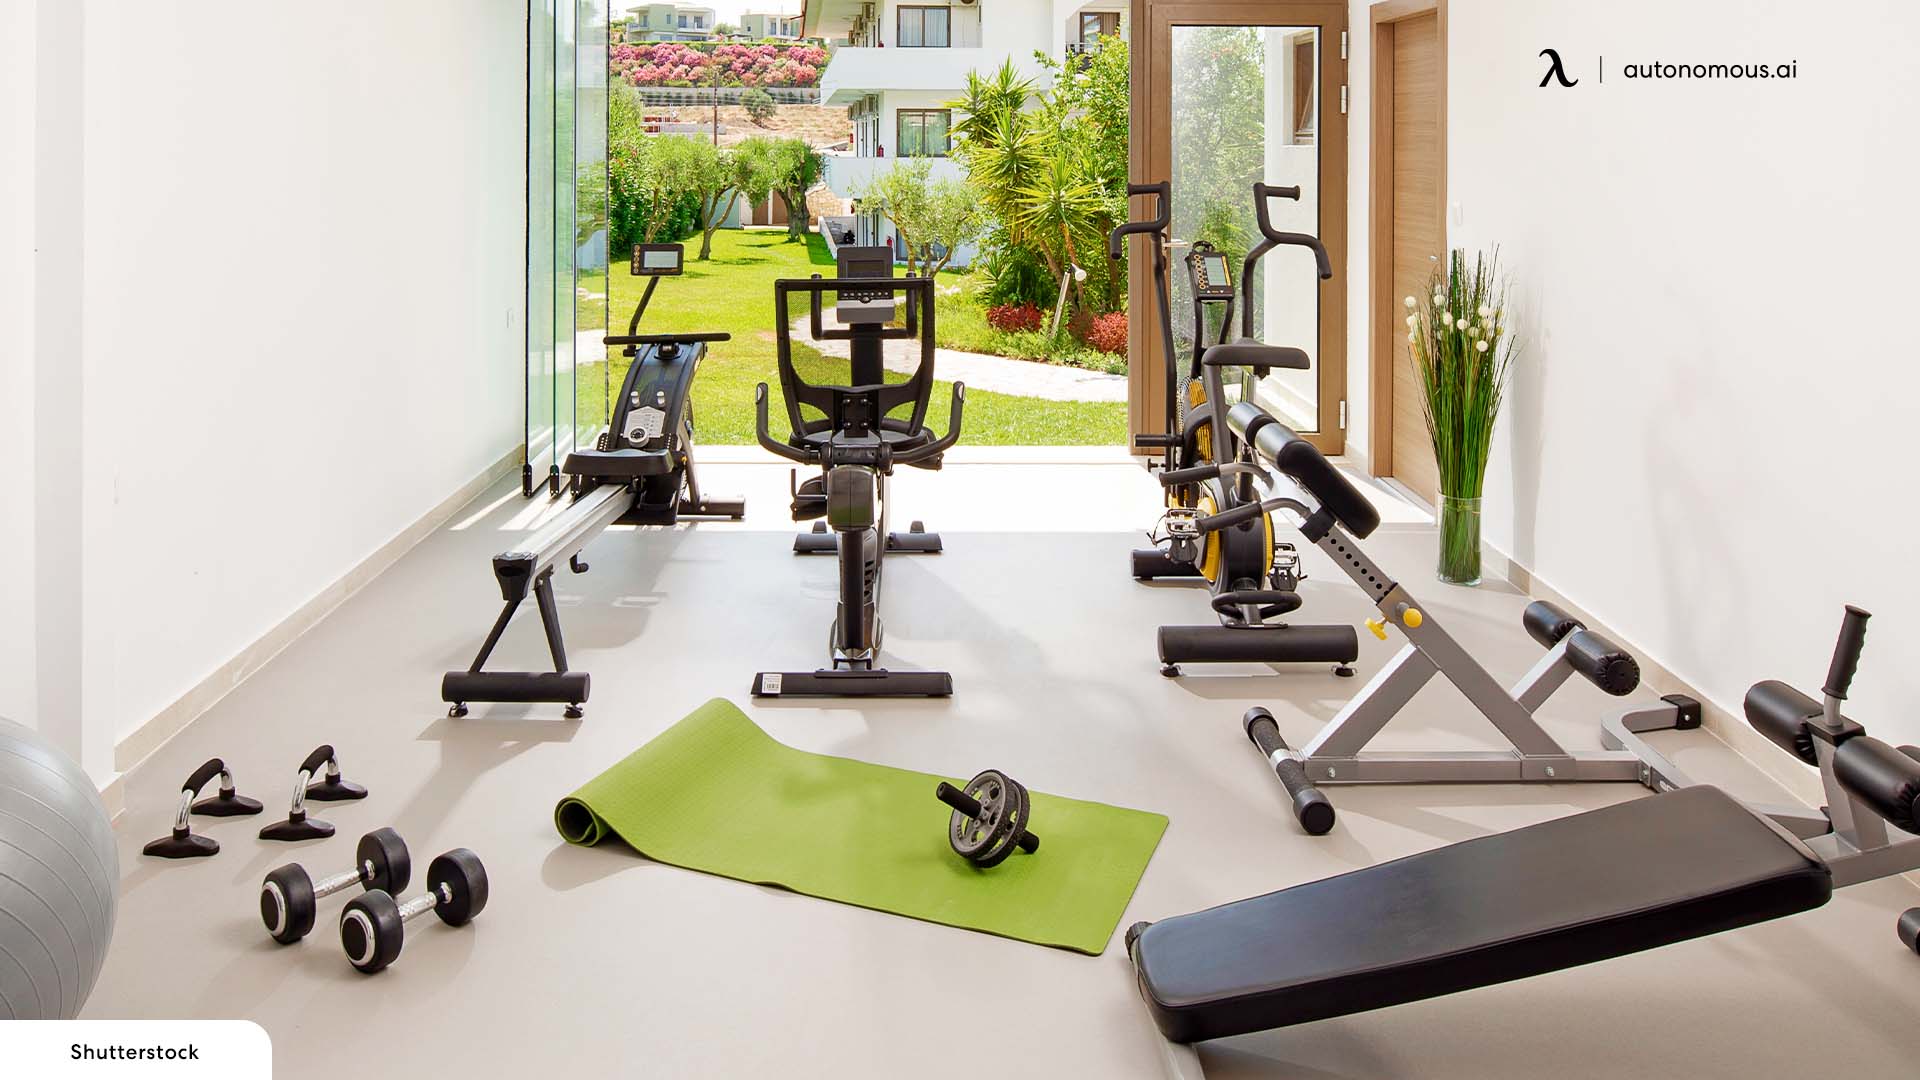 10 Garage Gym Ideas for Home Workout 2022